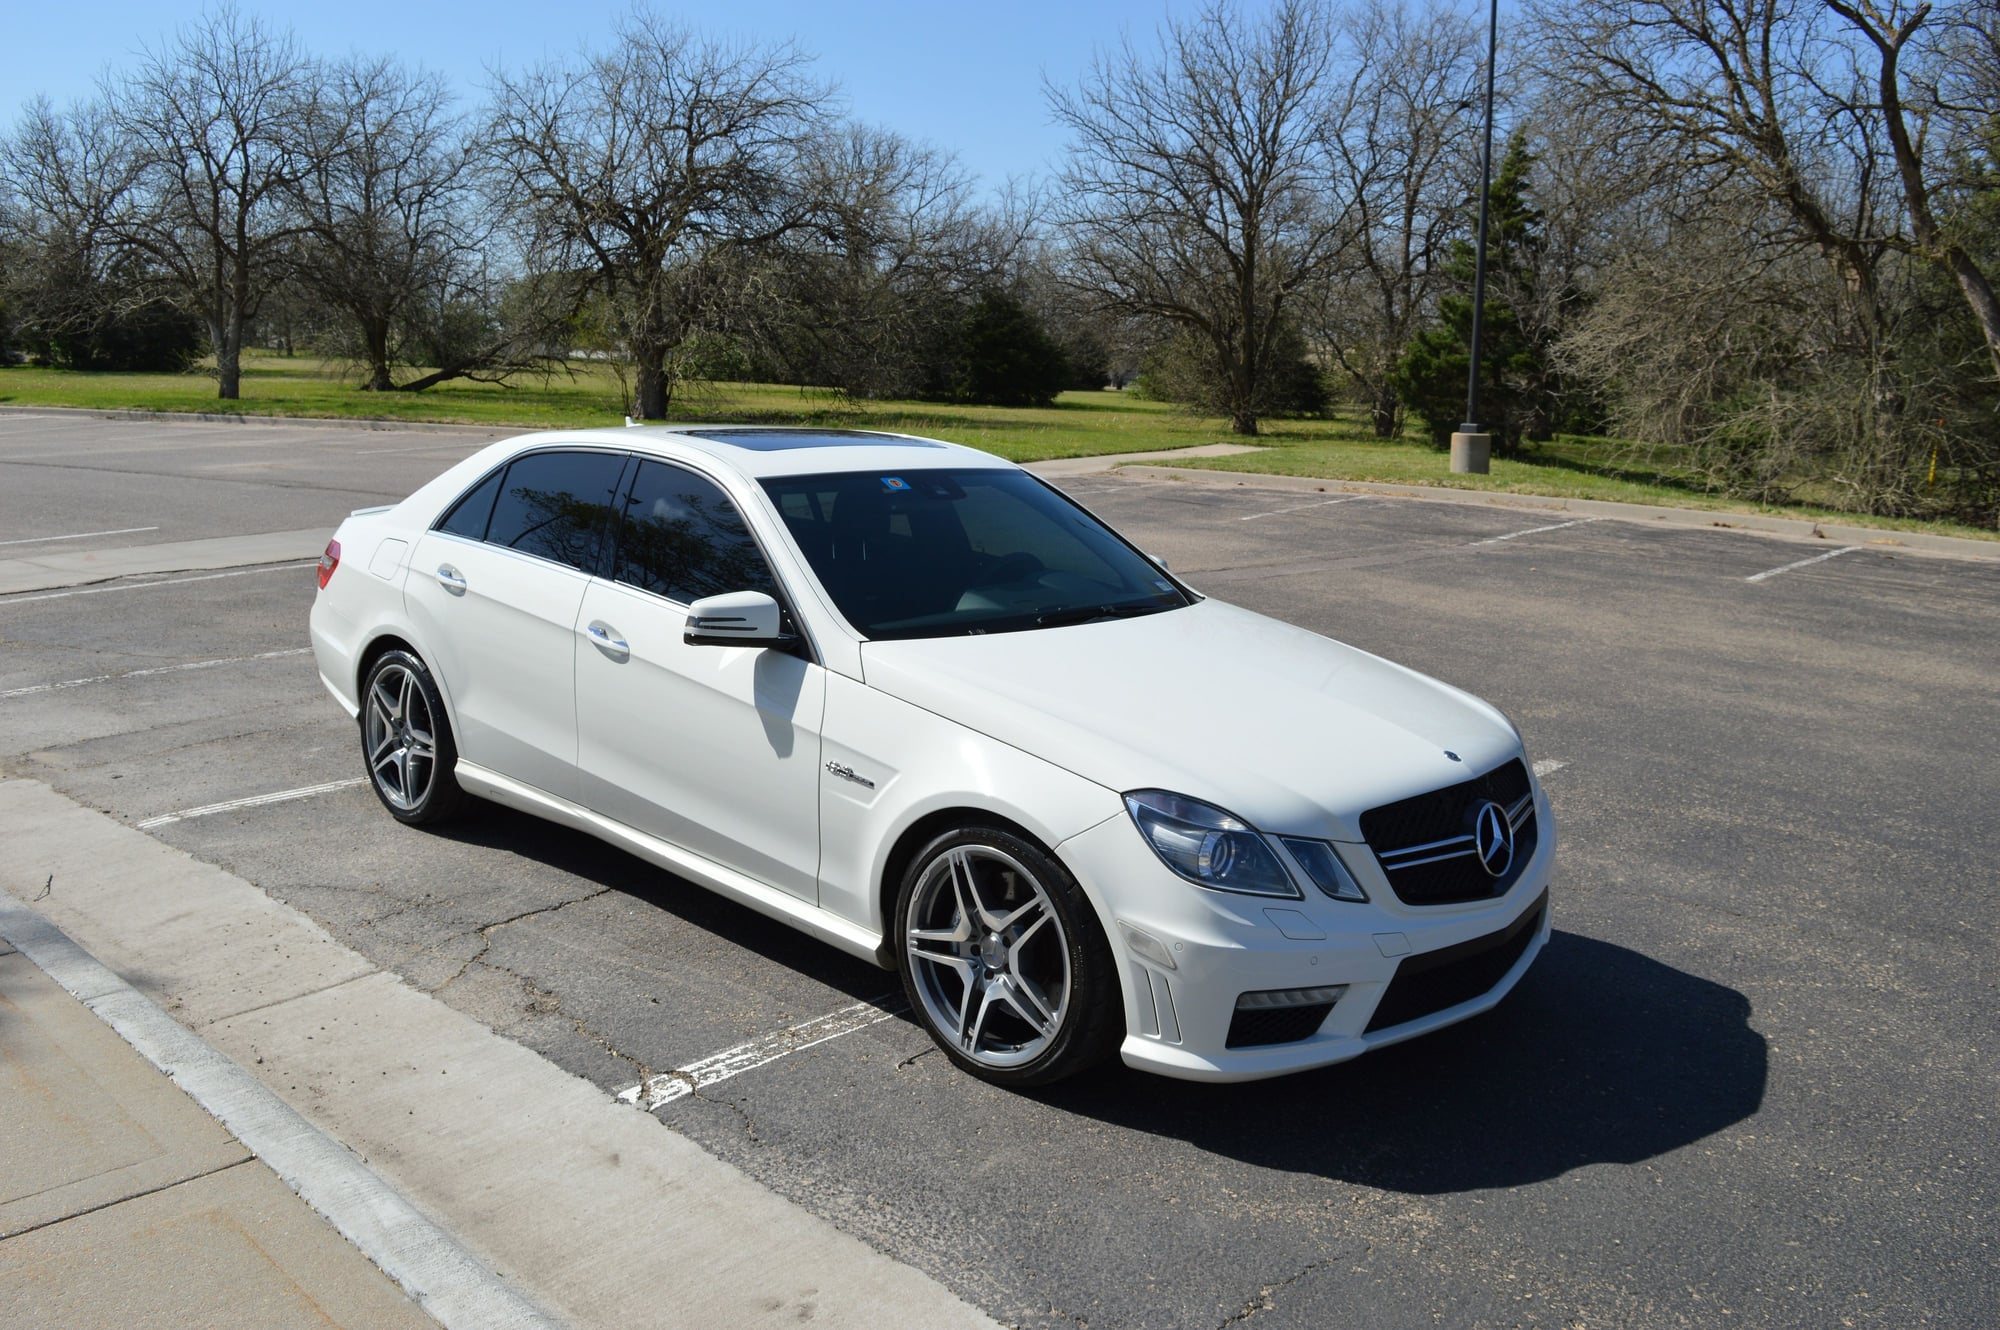 2010 Mercedes-Benz E63 AMG - Mercedes E63 AMG With Rare P030 Performance Package - Used - VIN WDDHF7HB8AA116824 - 118,408 Miles - 8 cyl - 2WD - Automatic - Sedan - White - Wichita, KS 67226, United States